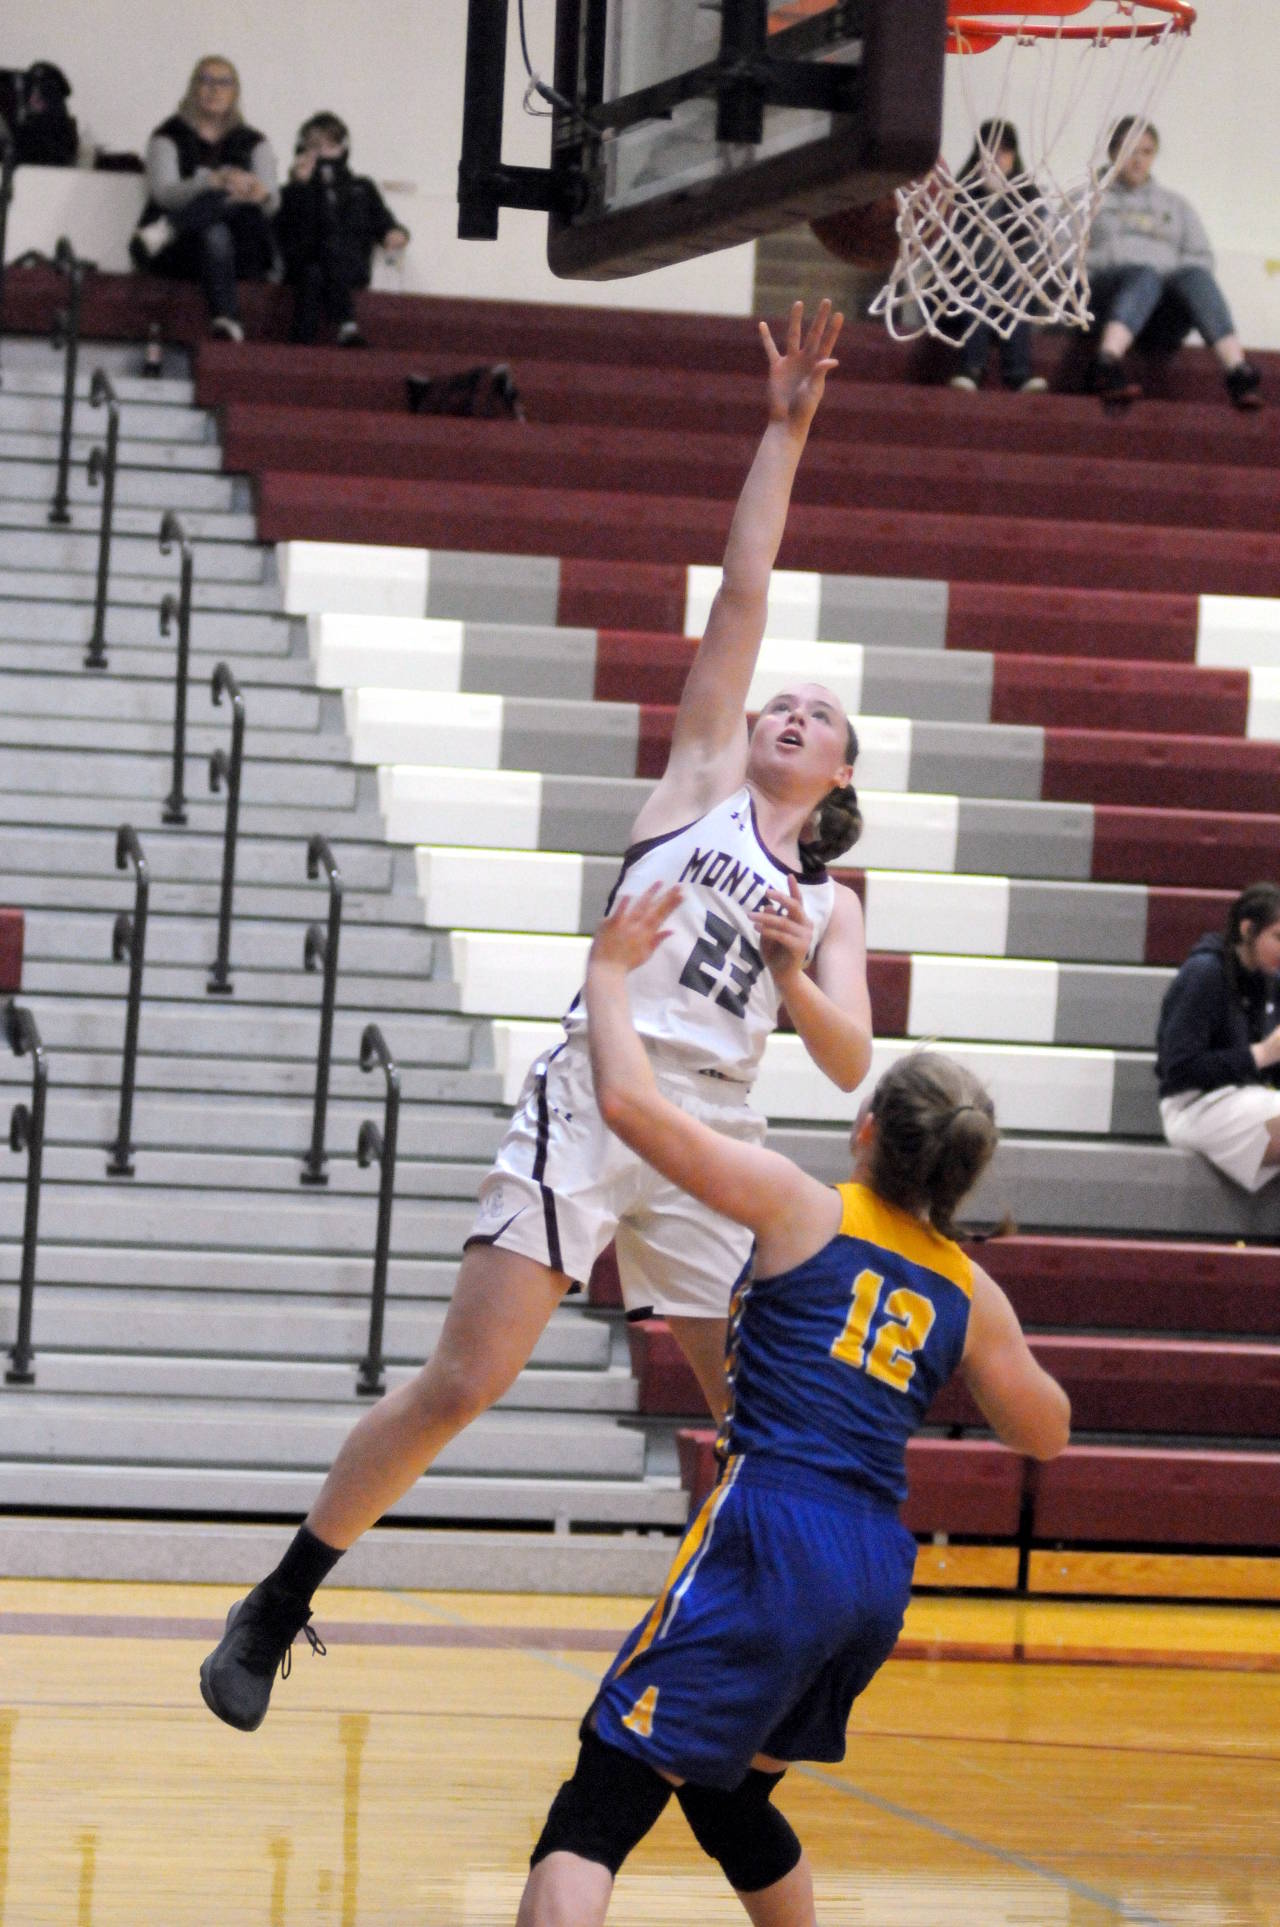 Montesano sophomore Paige Lisherness (23) scores on a layup during Saturday’s 68-49 win over Adna at Montesano High School. Lisherness scored a team-high 19 points in the victory. (Ryan Sparks | Grays Harbor News Group)